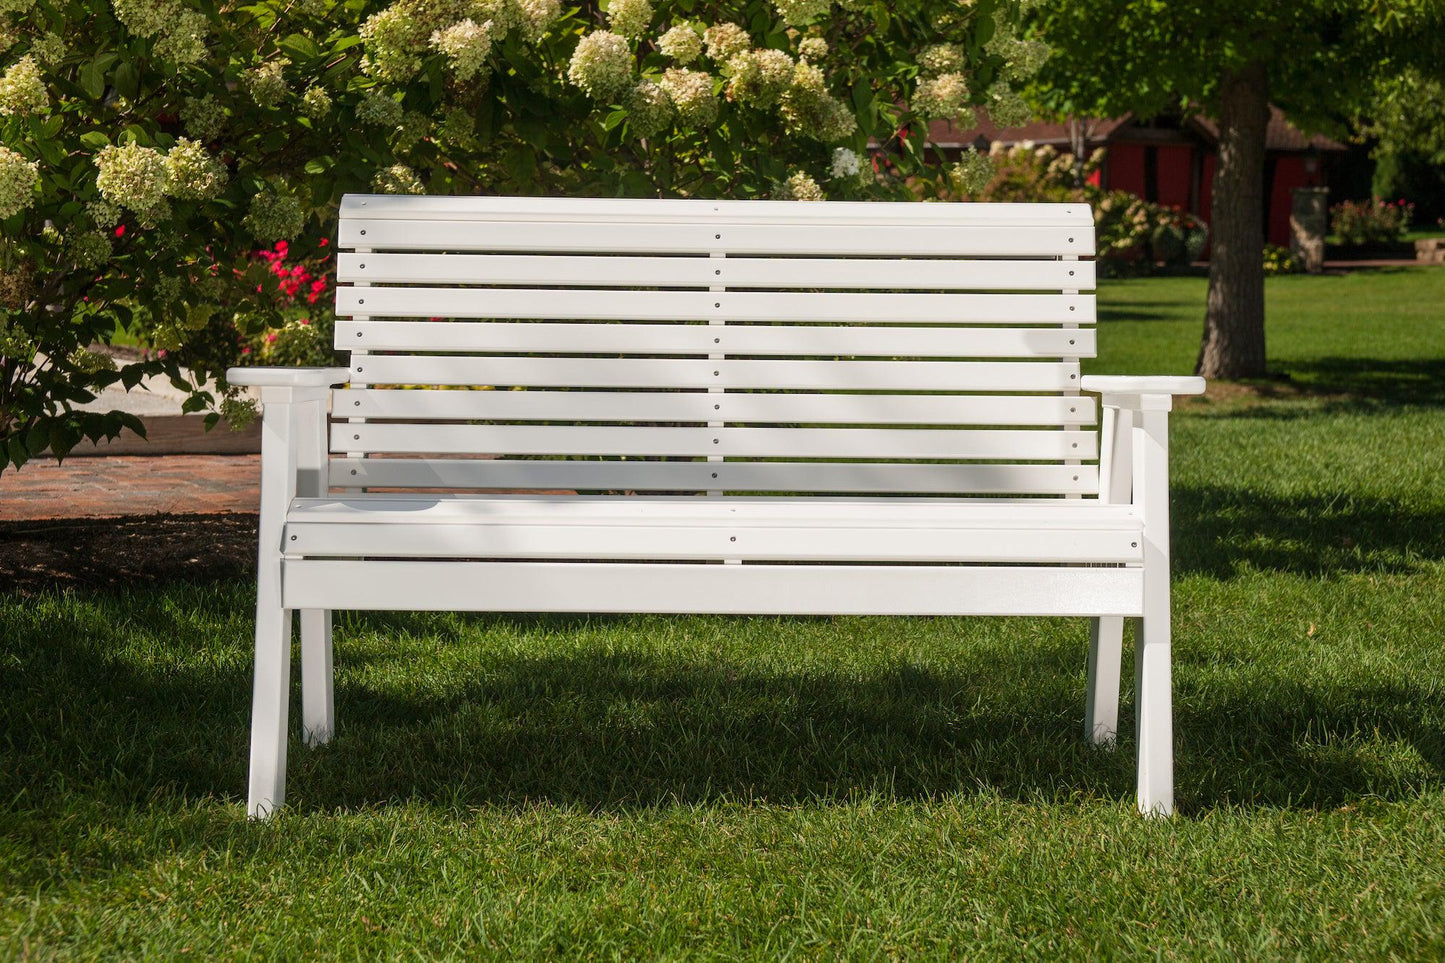 LuxCraft Rollback Recycled Plastic 4ft Plain Bench - LEAD TIME TO SHIP 10 to 12 BUSINESS DAYS